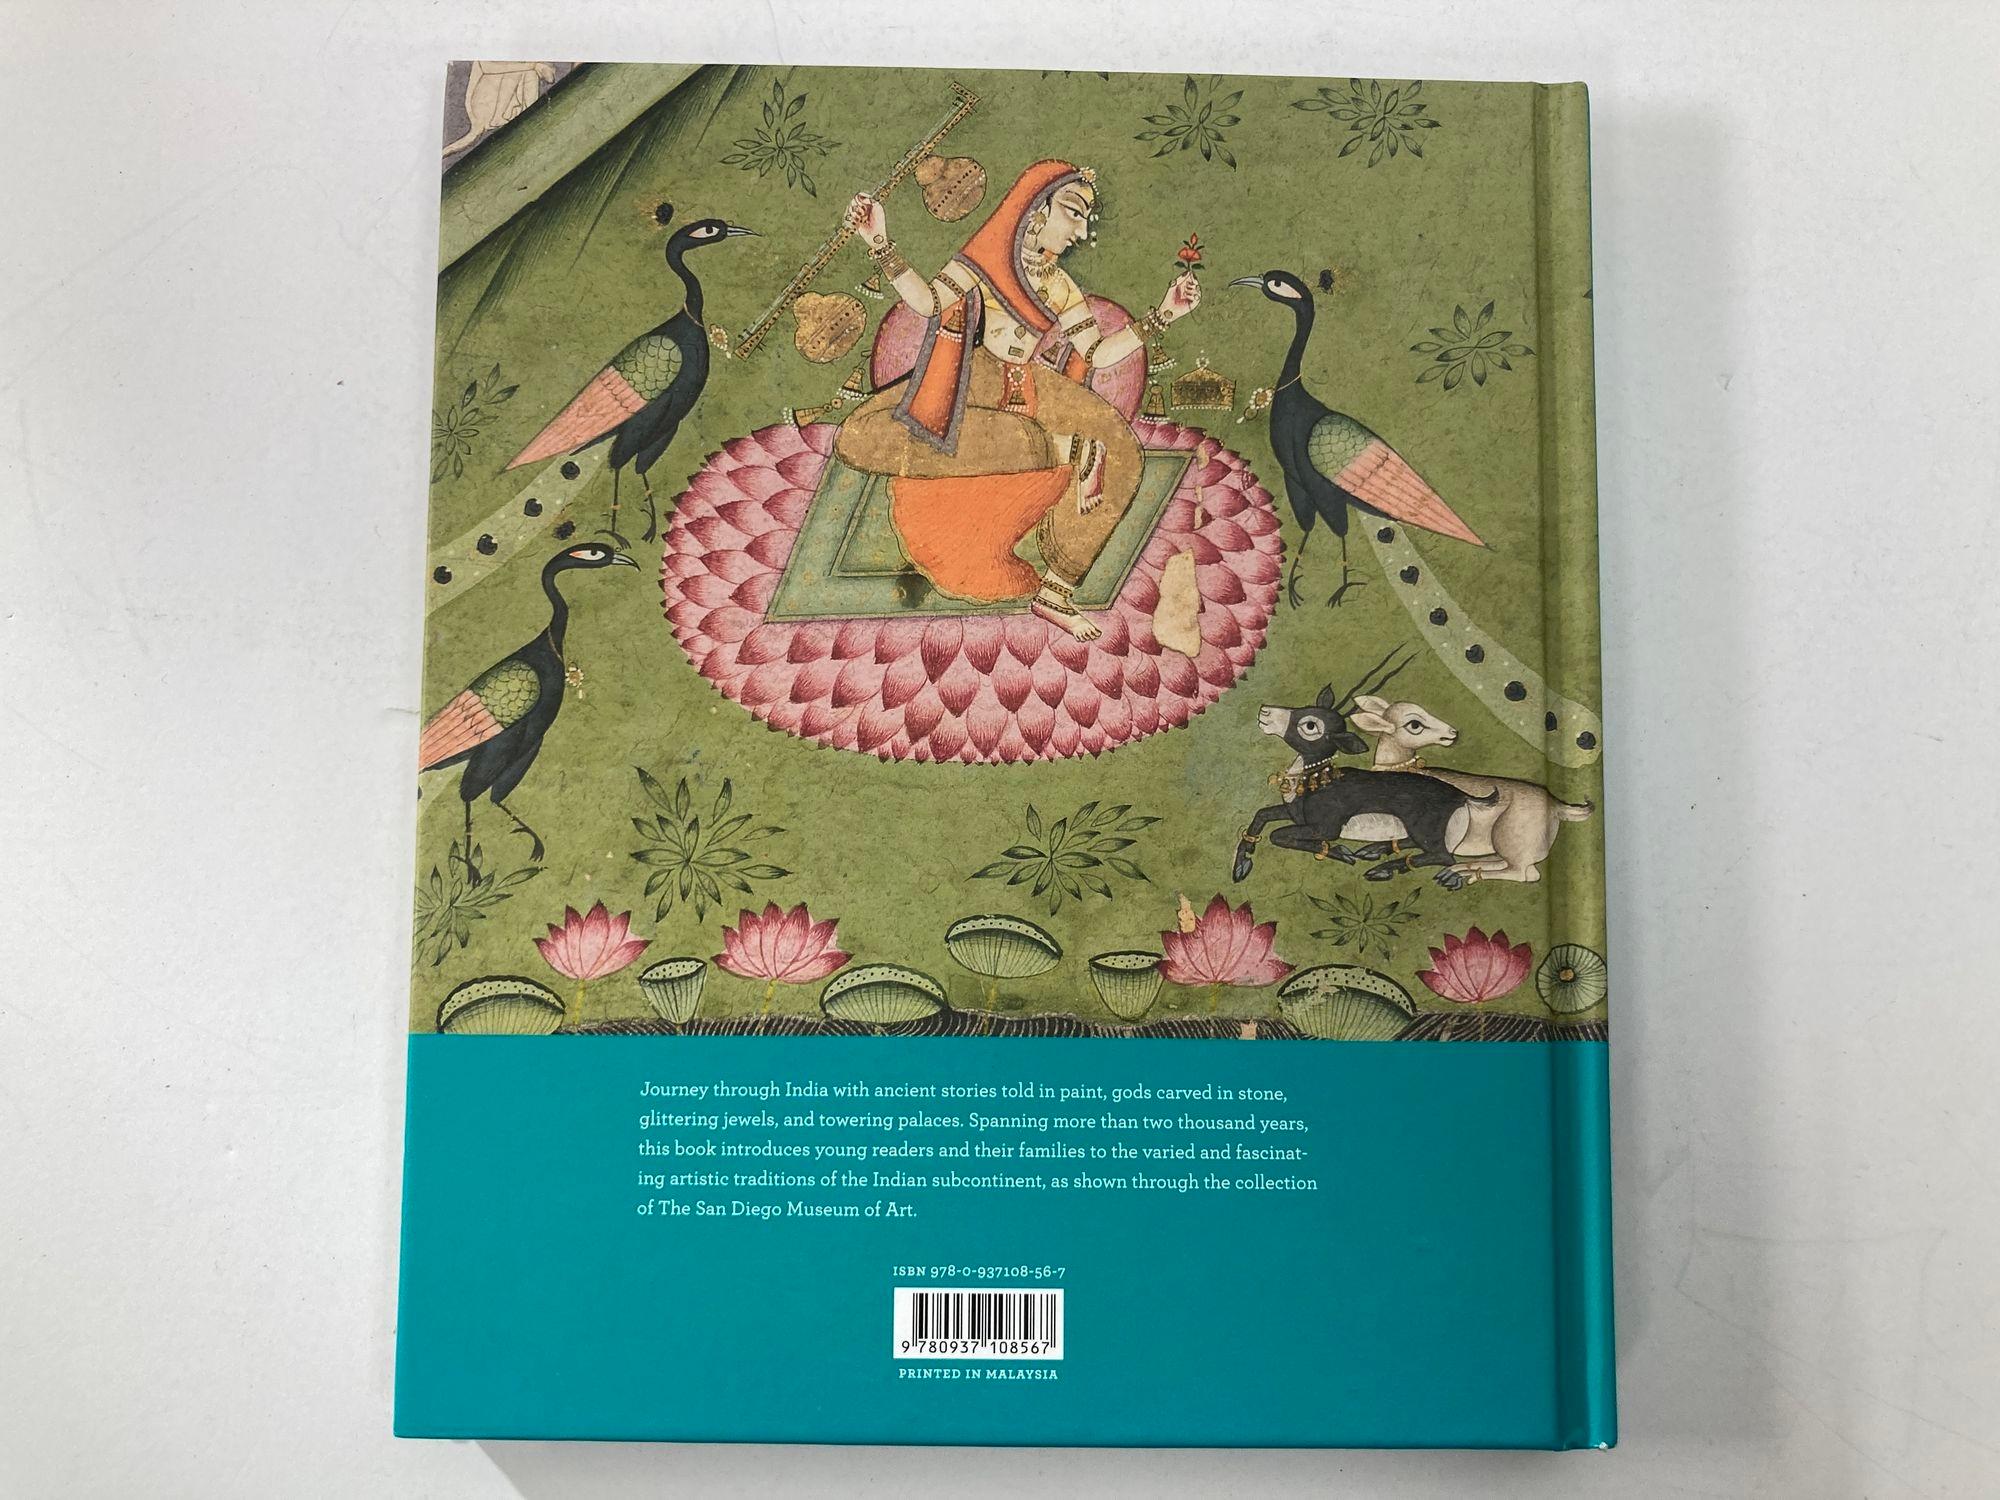 Peacocks and Palaces : Exploring the Art of India hardcover book by Lucy Holland.
This charmingly illustrated interactive book introduces children to the arts of India This delightfully illustrated volume introduces children and their families to